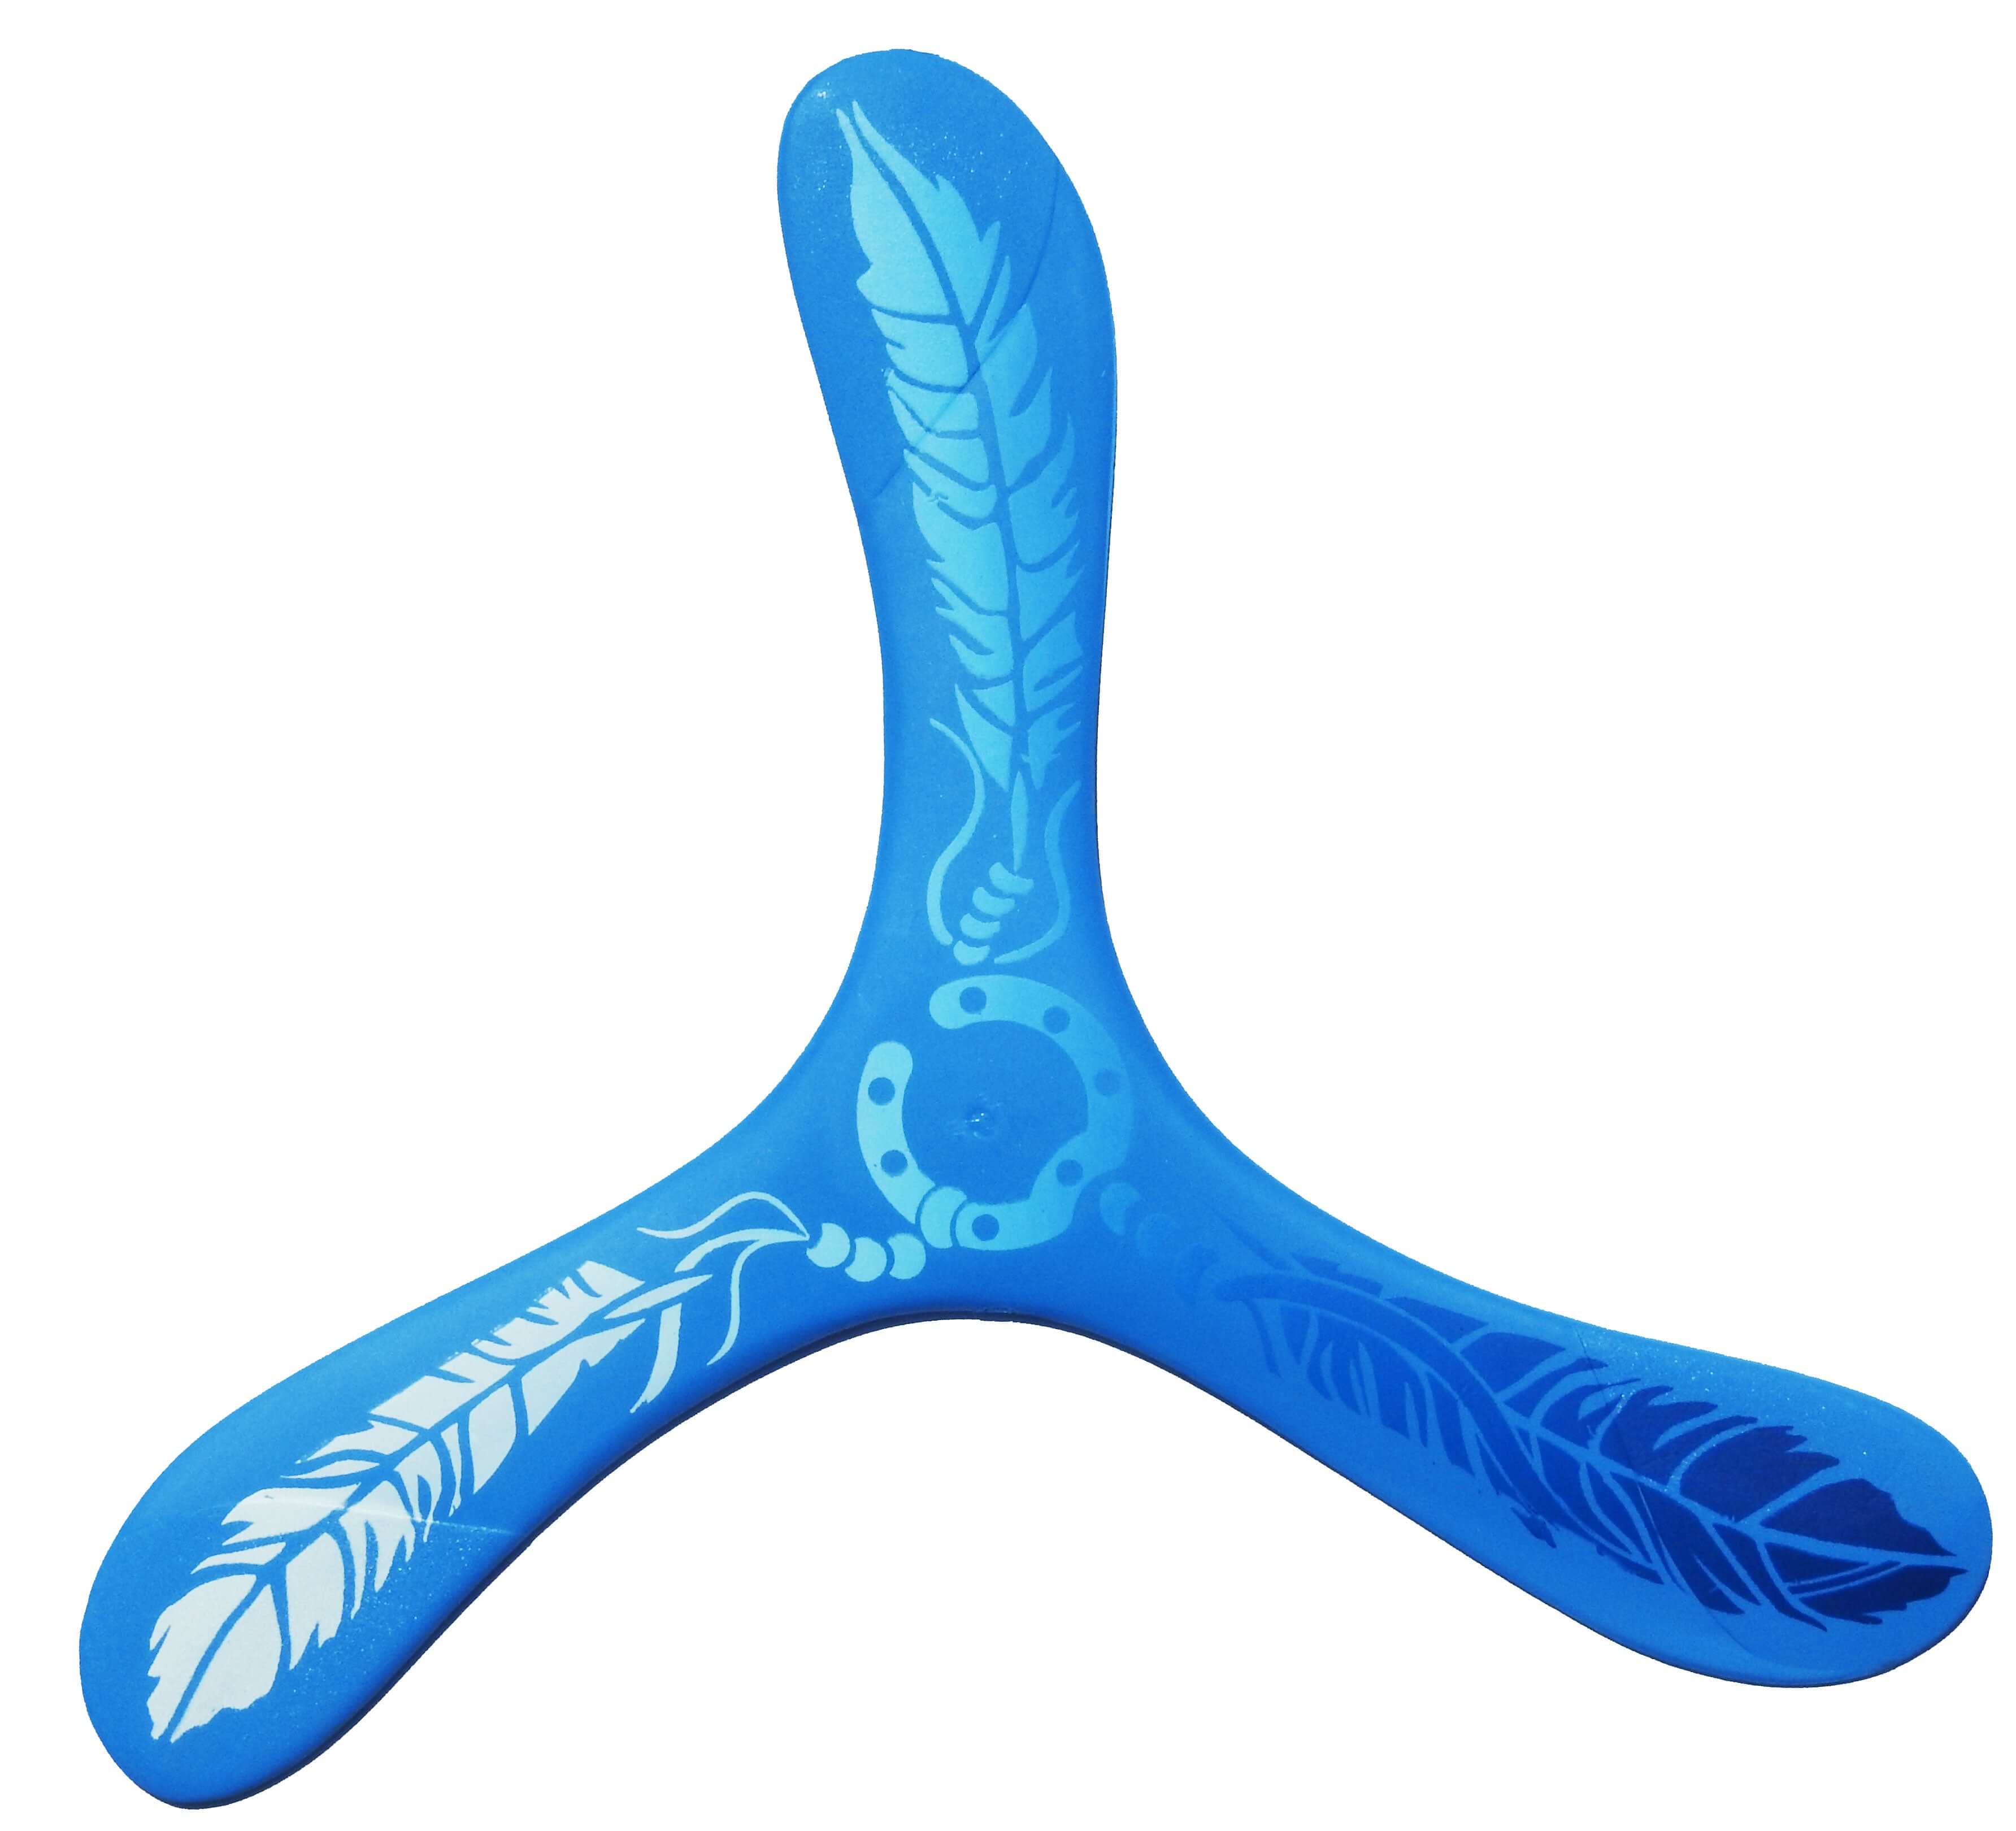 Feather Boomerangs - Optimized for High Spin Rates.